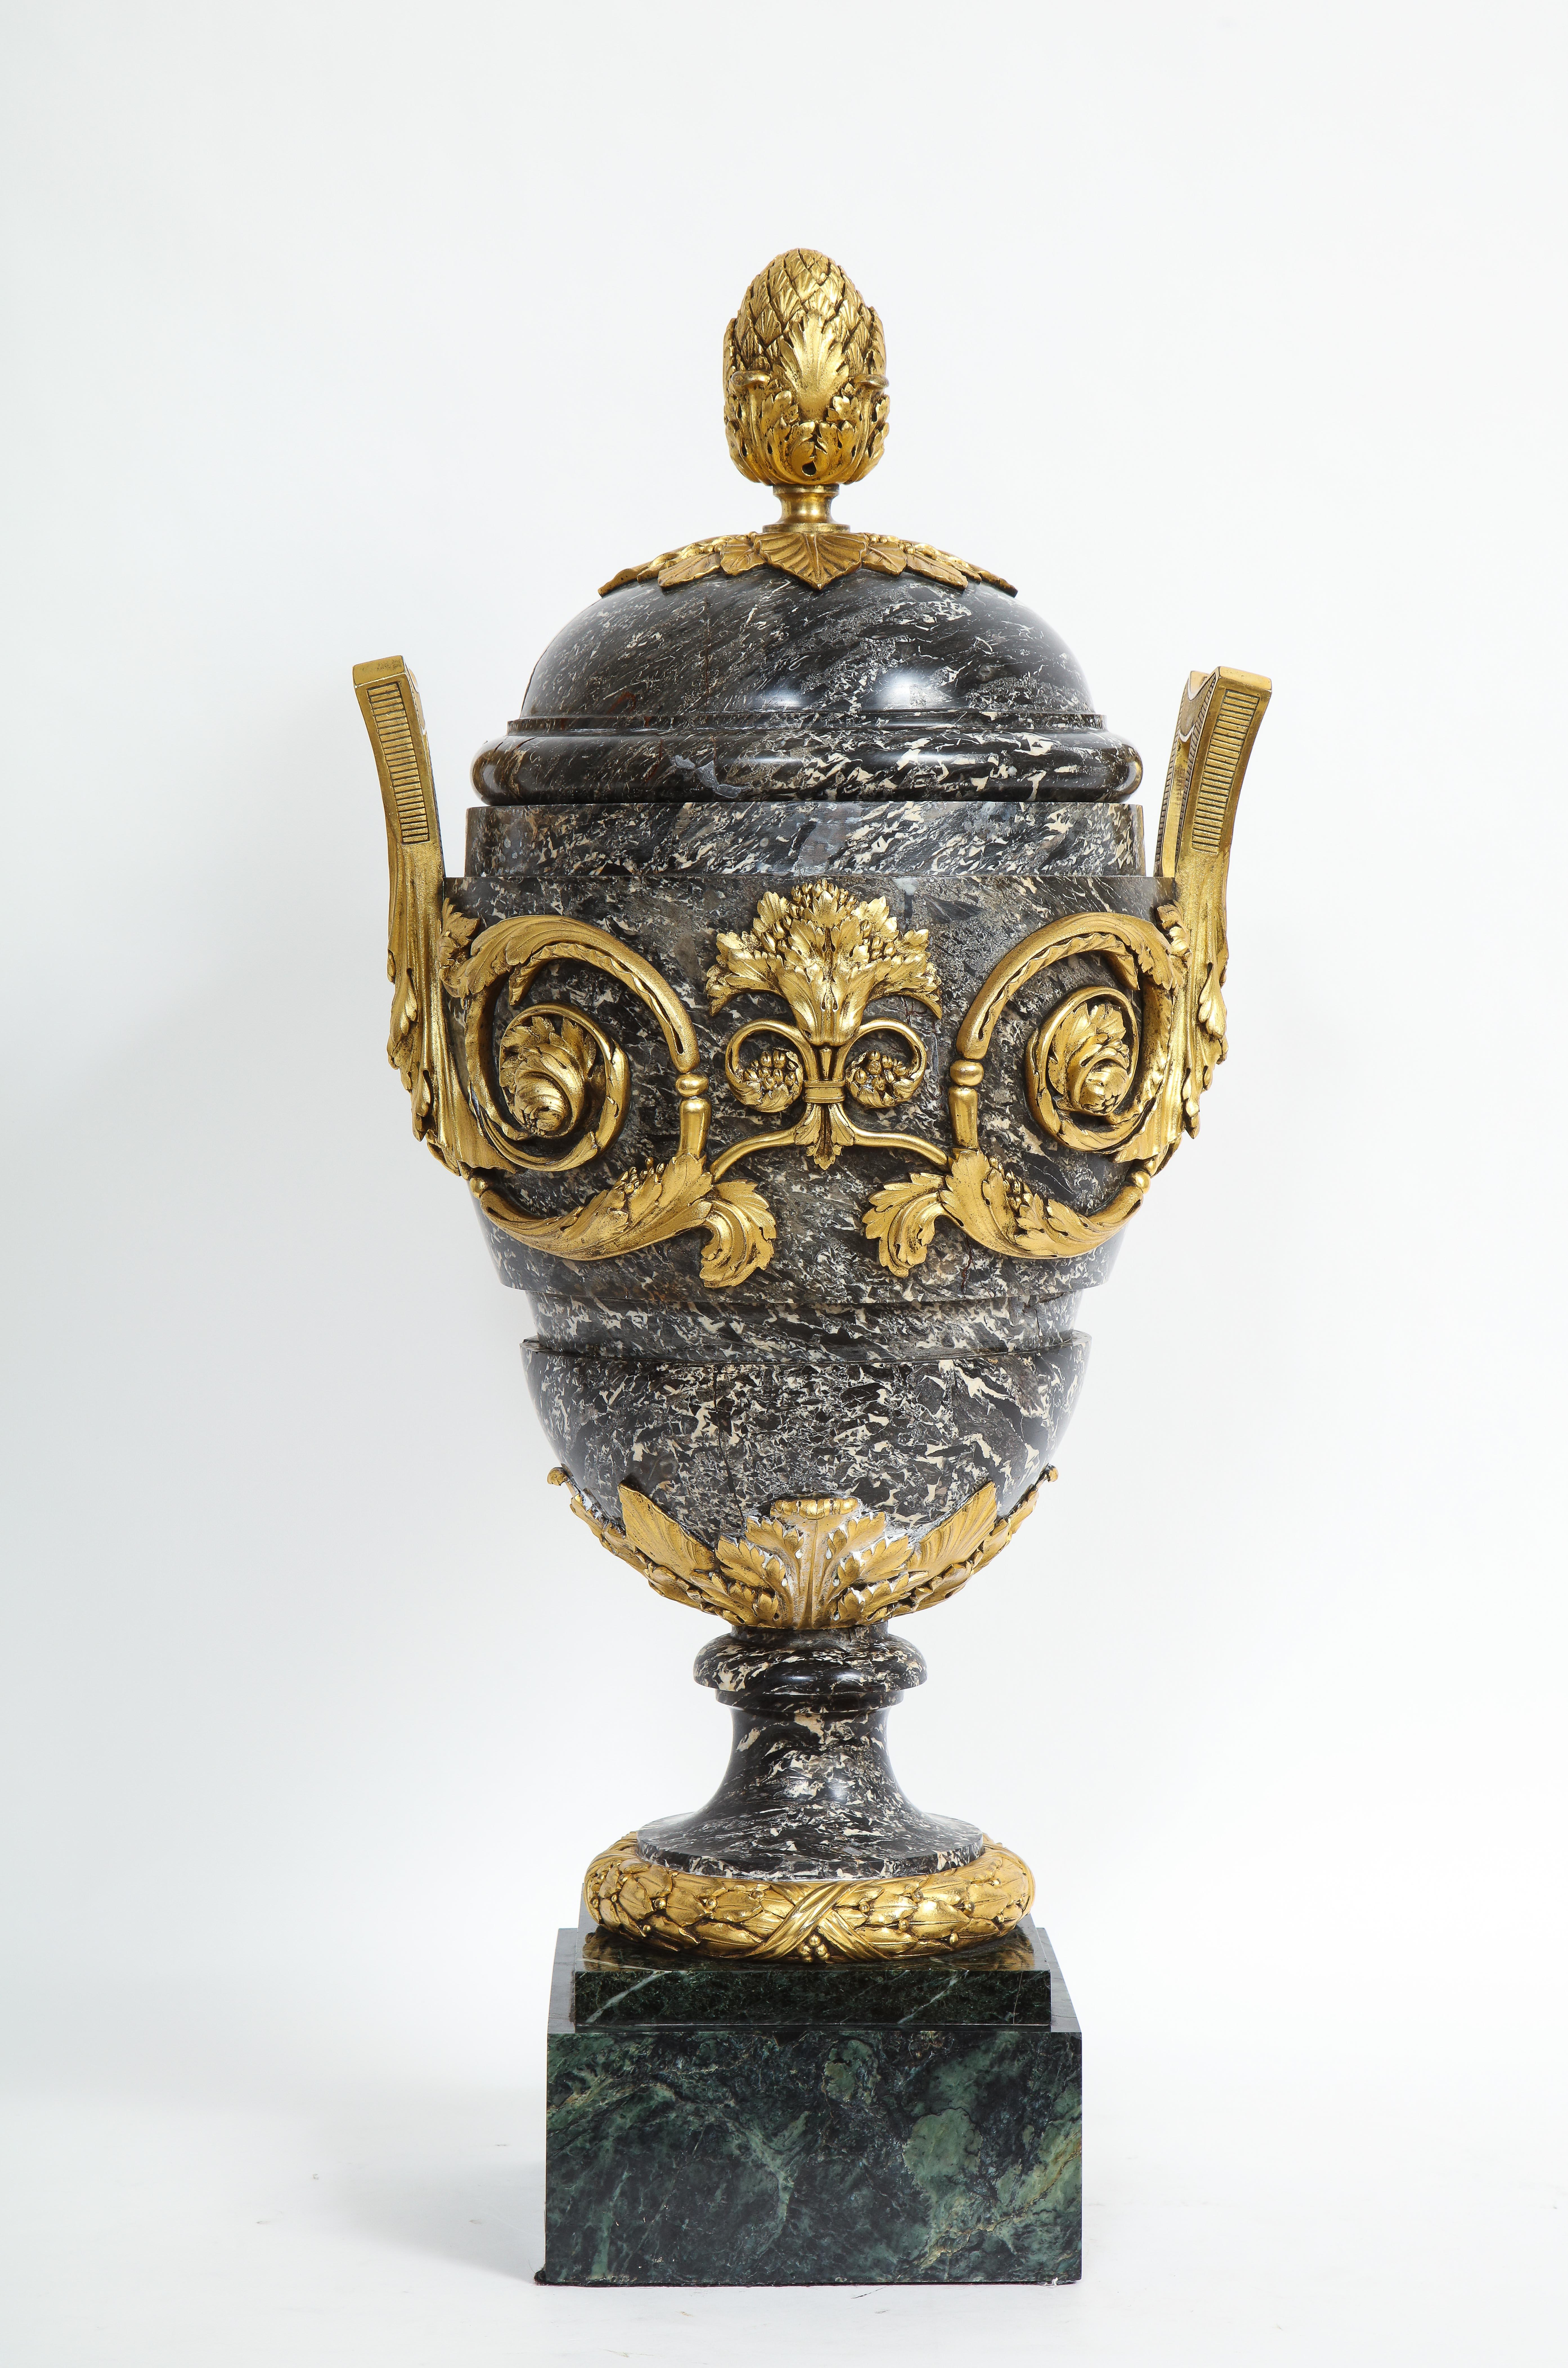 A Monumental Late 1700's/Early 1800's French Ormolu Mounted Marble Covered Urn

Presenting an extraordinary Monumental 18/19th Century French Ormolu Mounted Marble Covered Urn. Crafted with meticulous precision, this exquisite urn showcases a